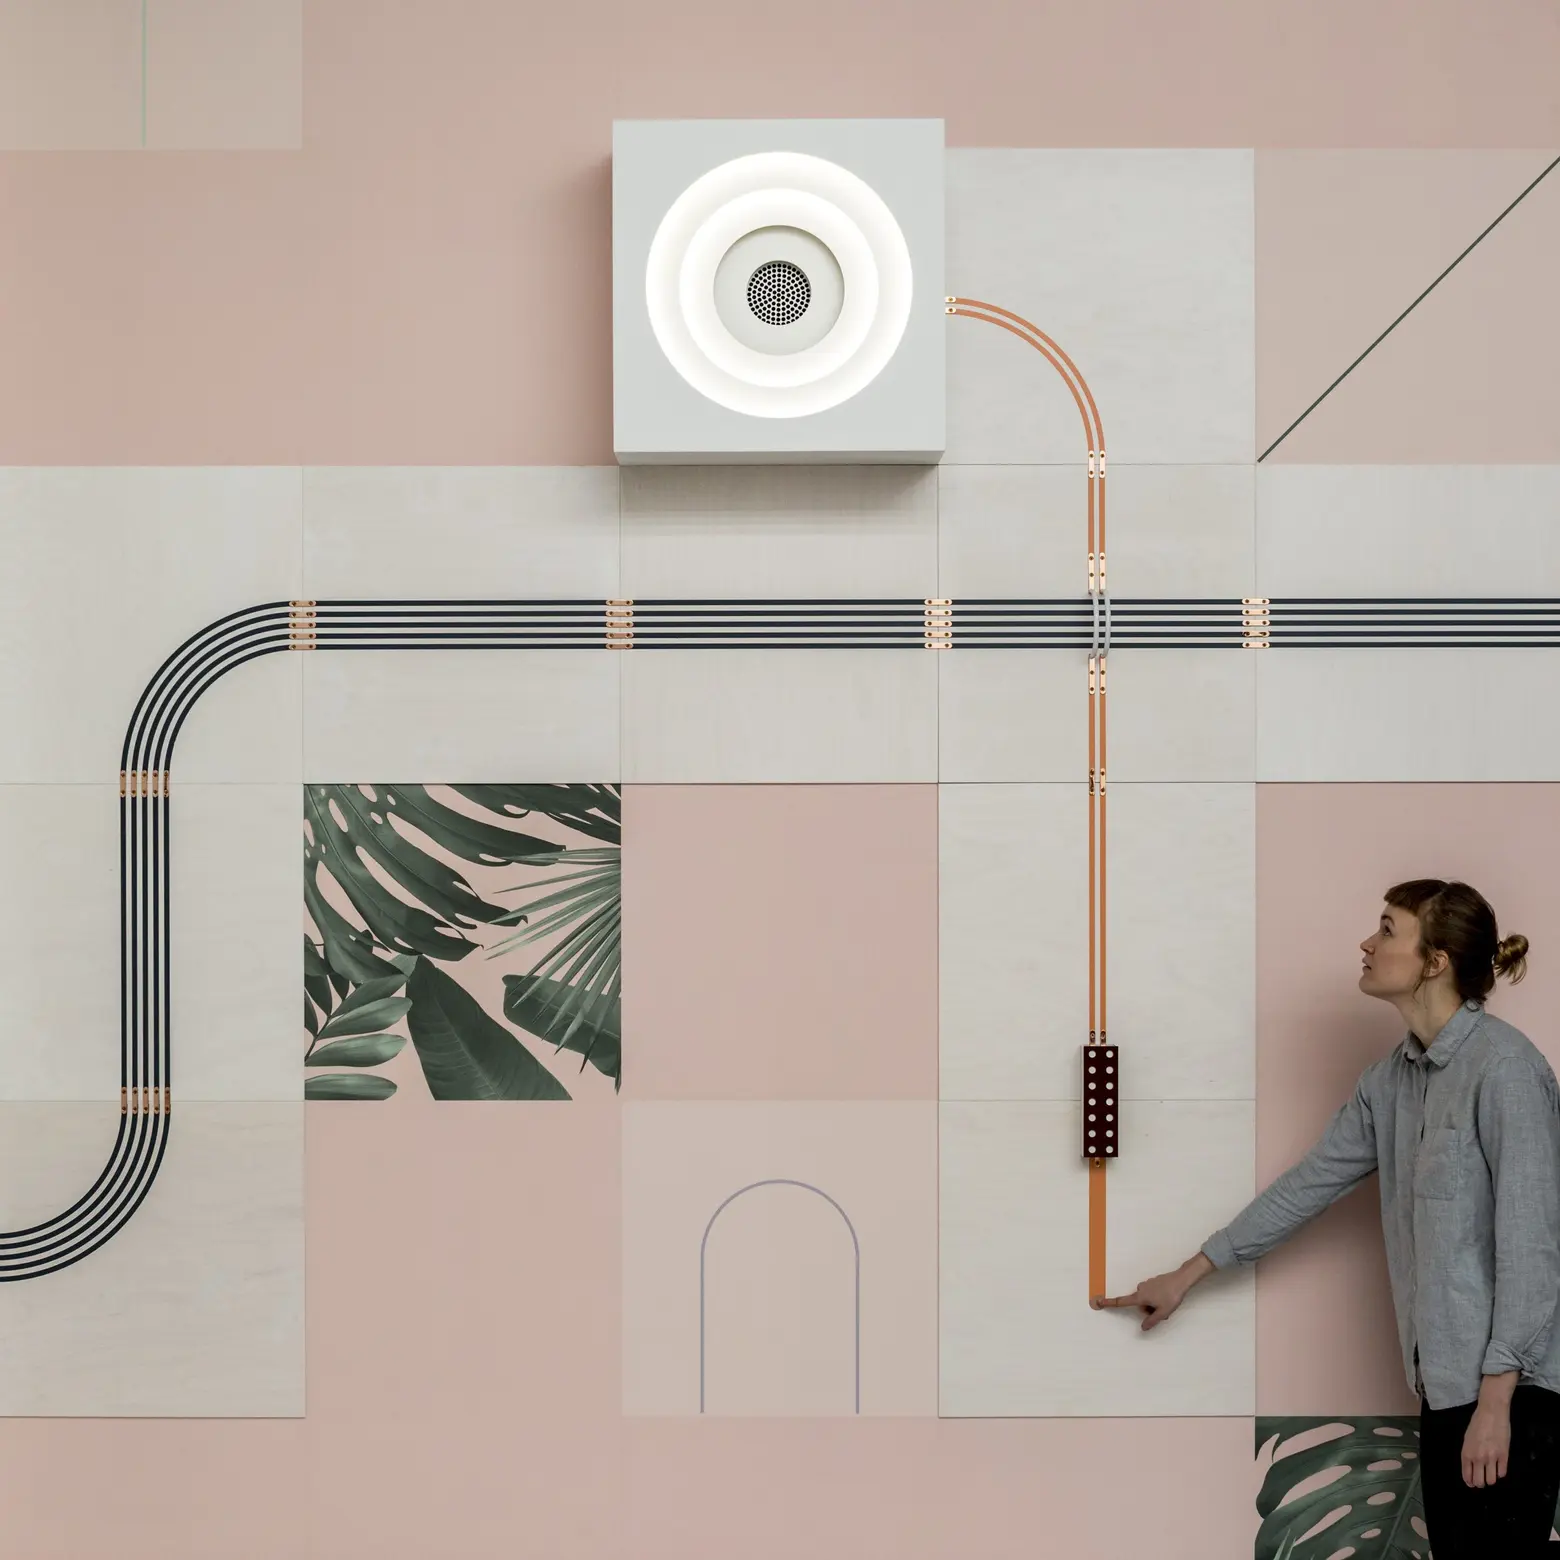 Flavor Paper and UM Project’s ‘Conduct’ wallpaper doubles as a power source